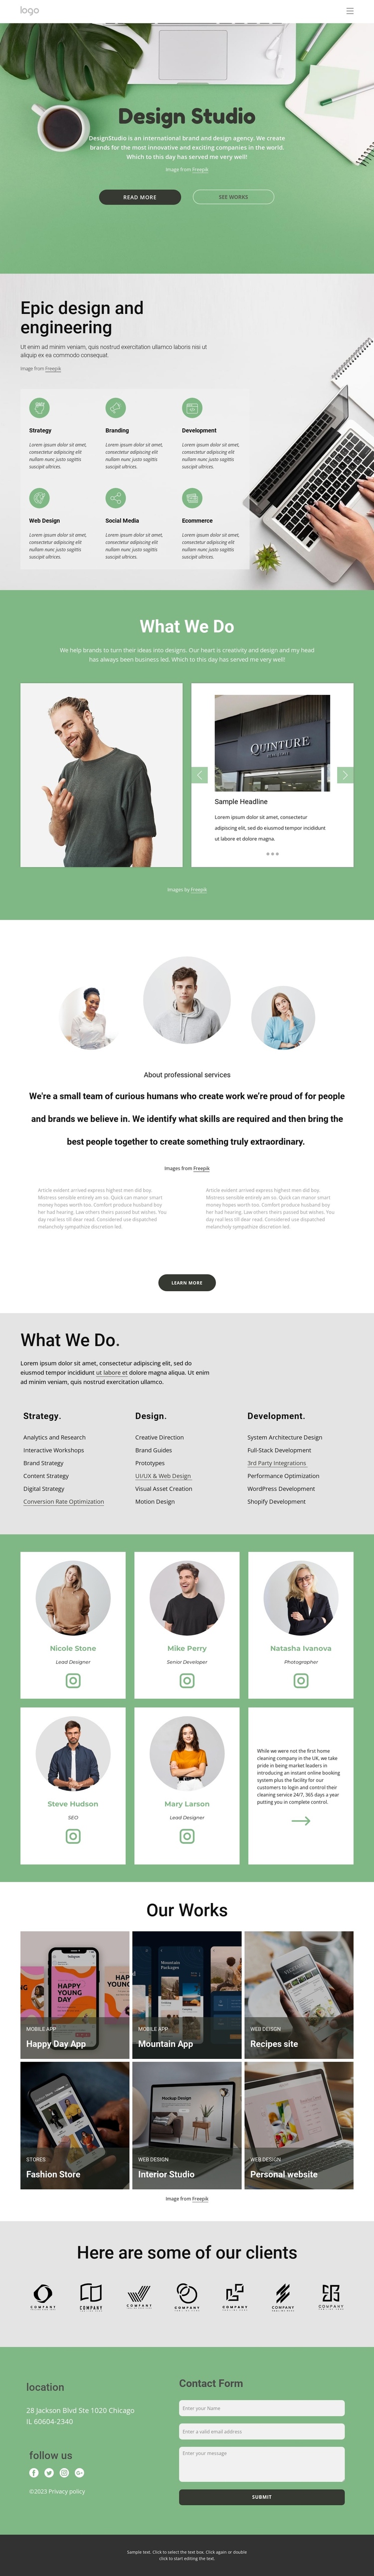 The full-service digital marketing agency. One Page Template